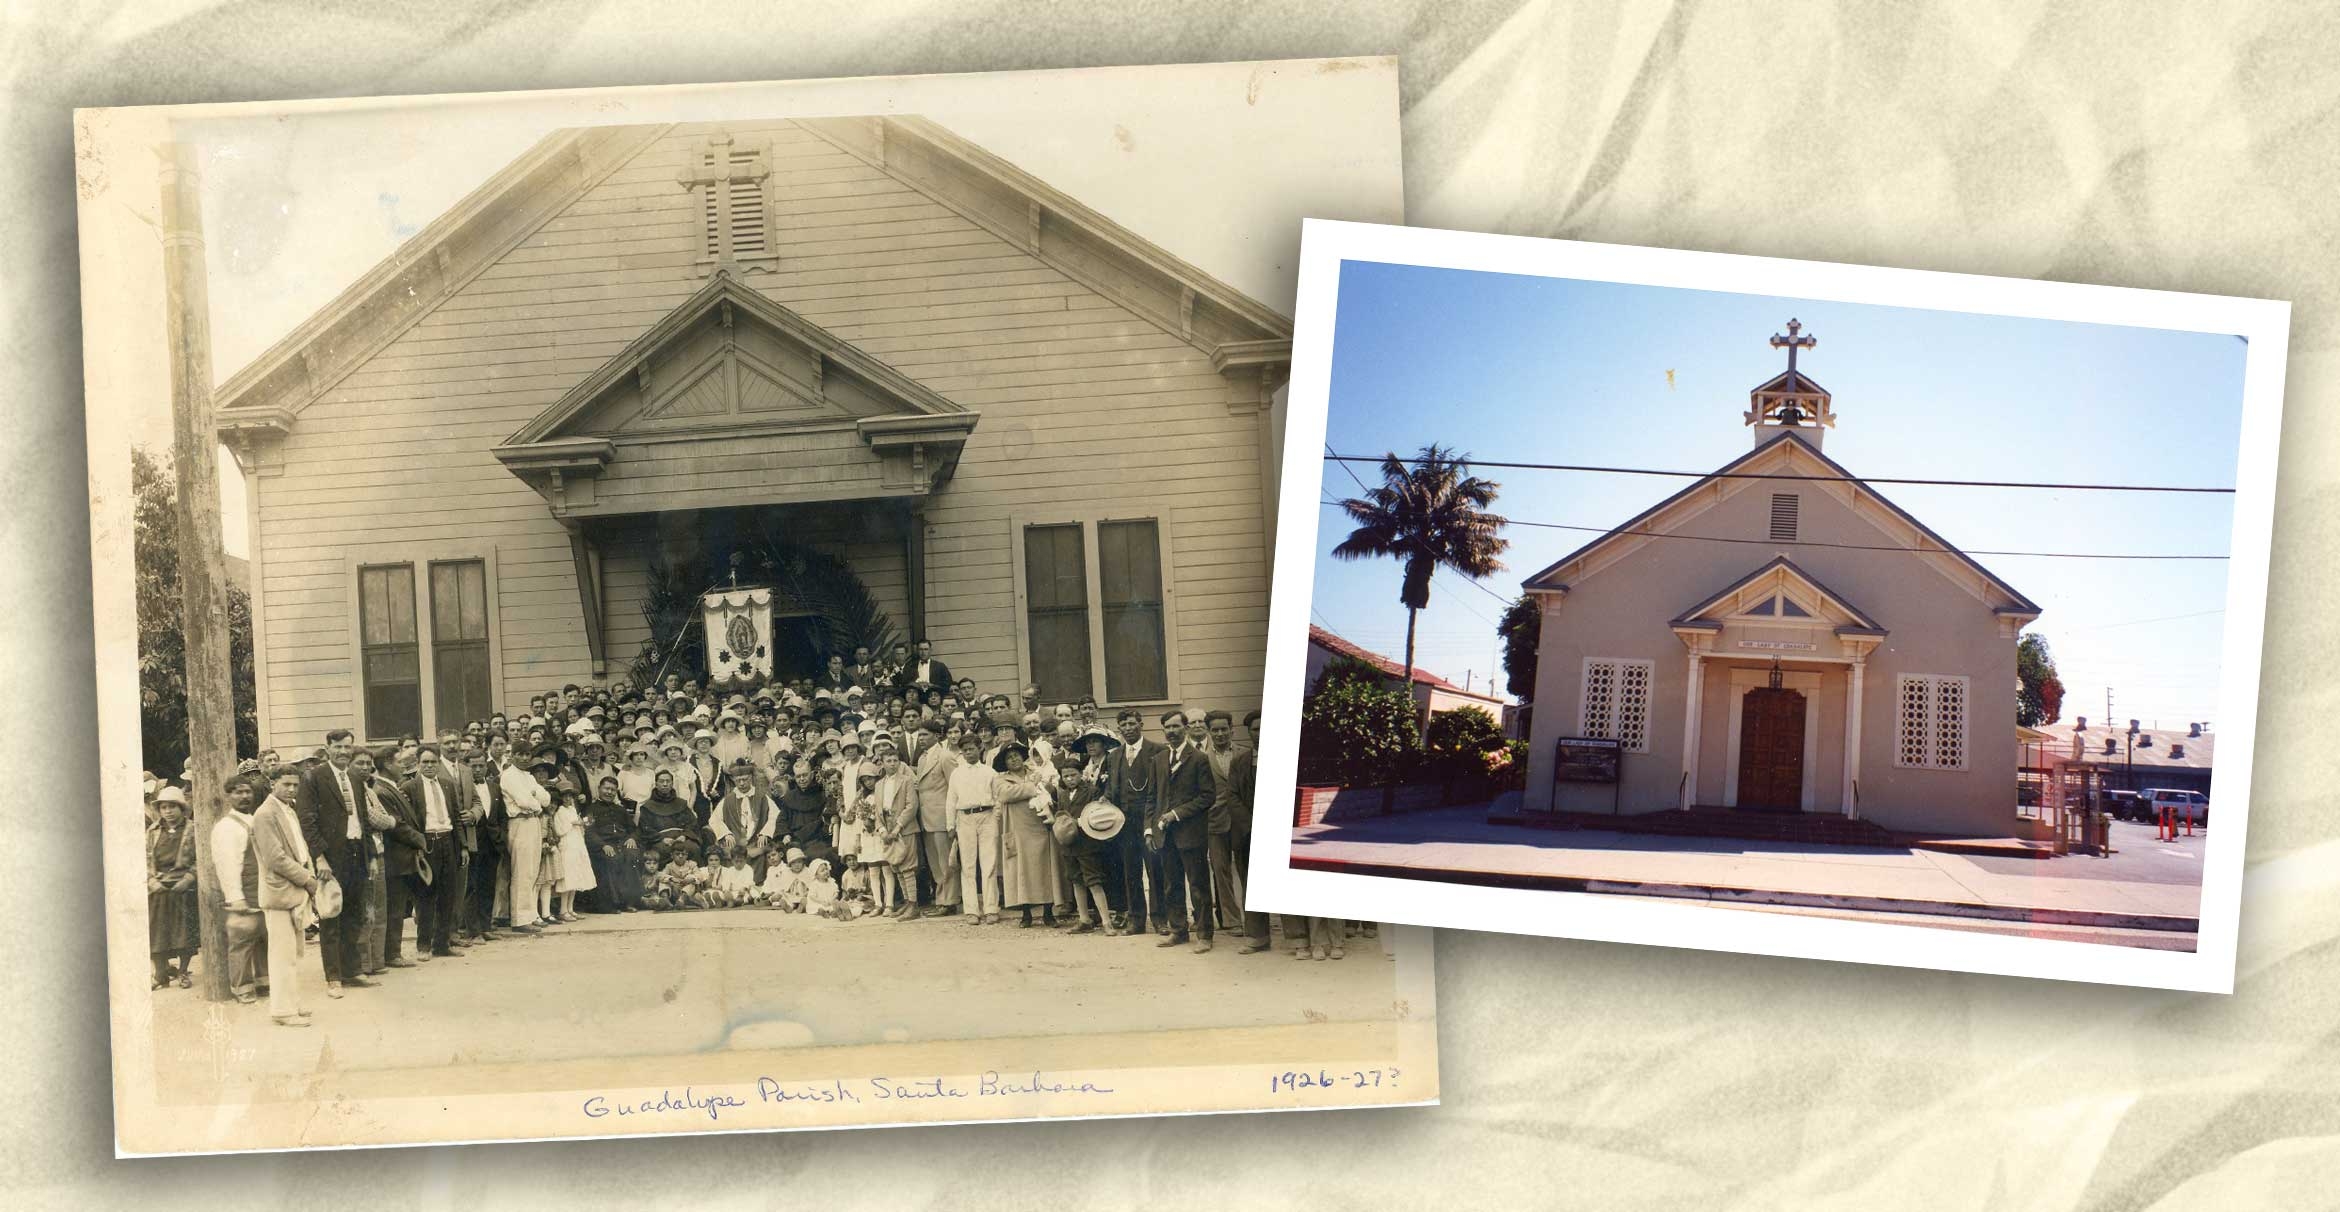 Archival photos of Our Lady of Guadalupe Parish in Santa Barbara